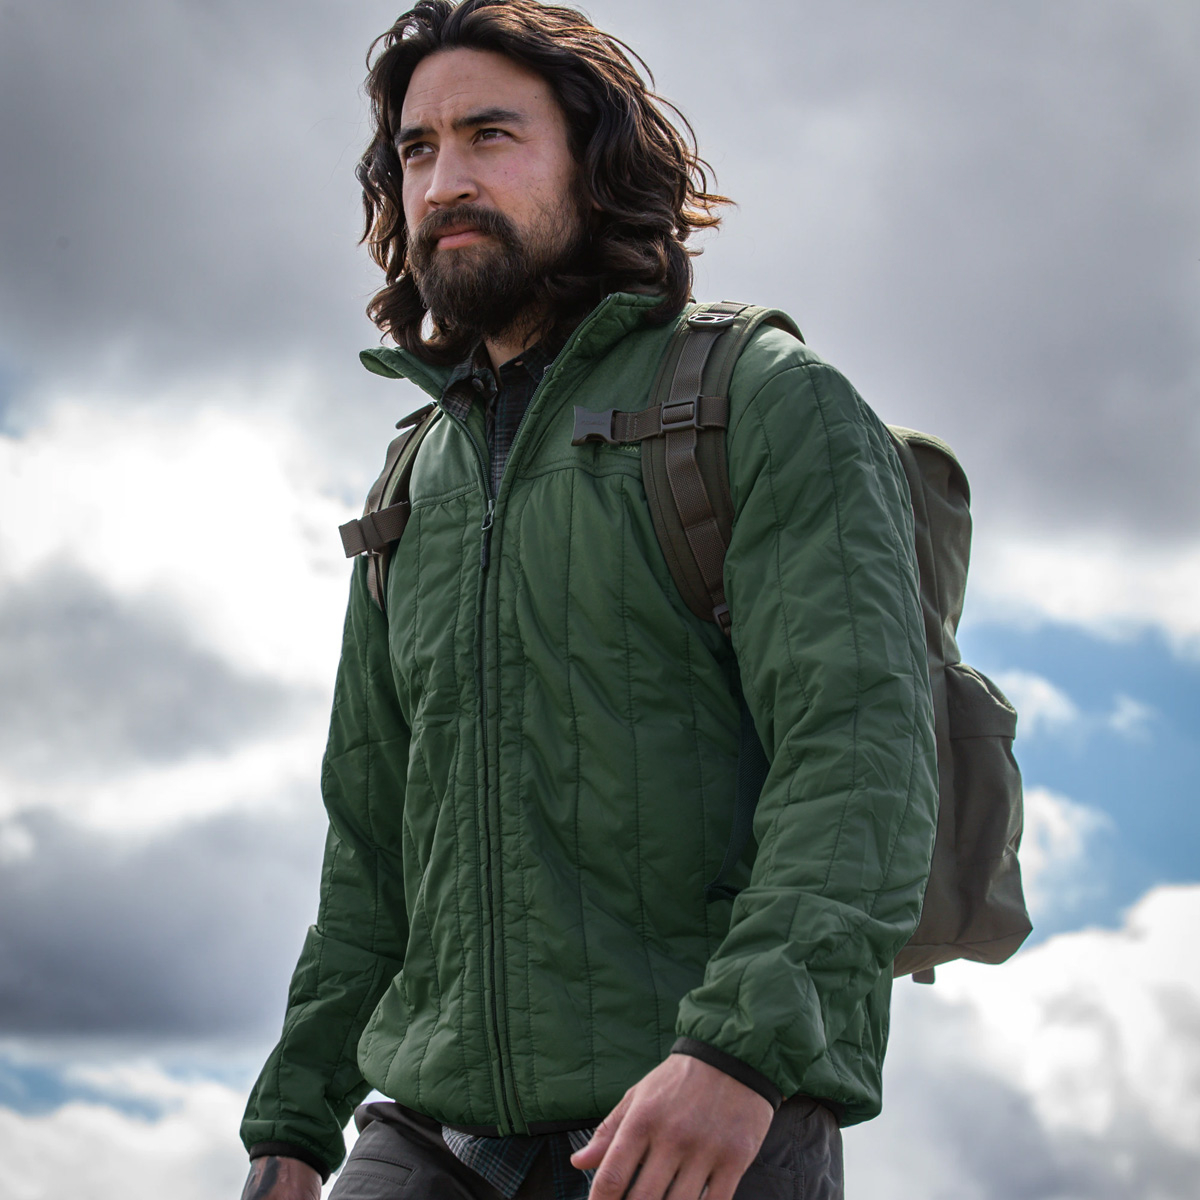 Filson Ultra Light Jacket Dark Vine, perfect as an outer layer or underneath a heavy jacket for warmth in extreme cold